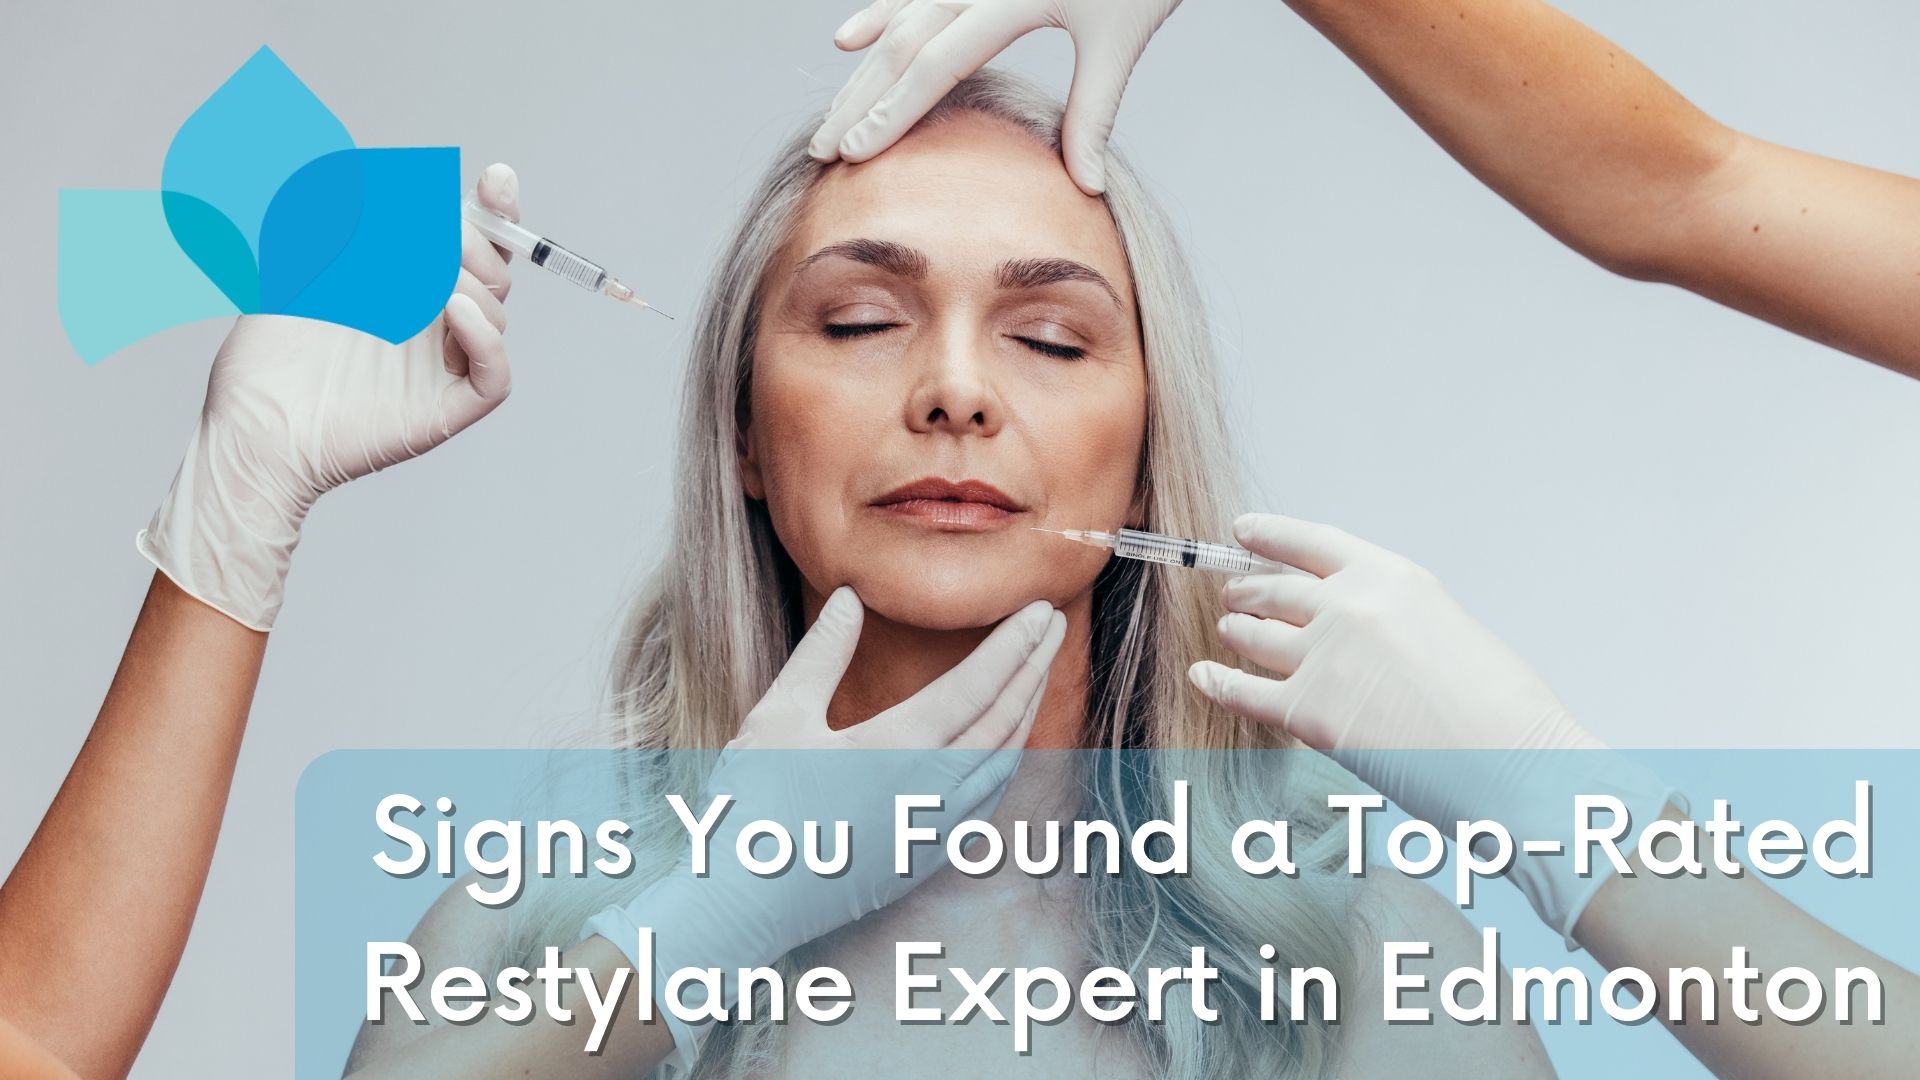 You Found a Top-Rated Restylane Expert in Edmonton